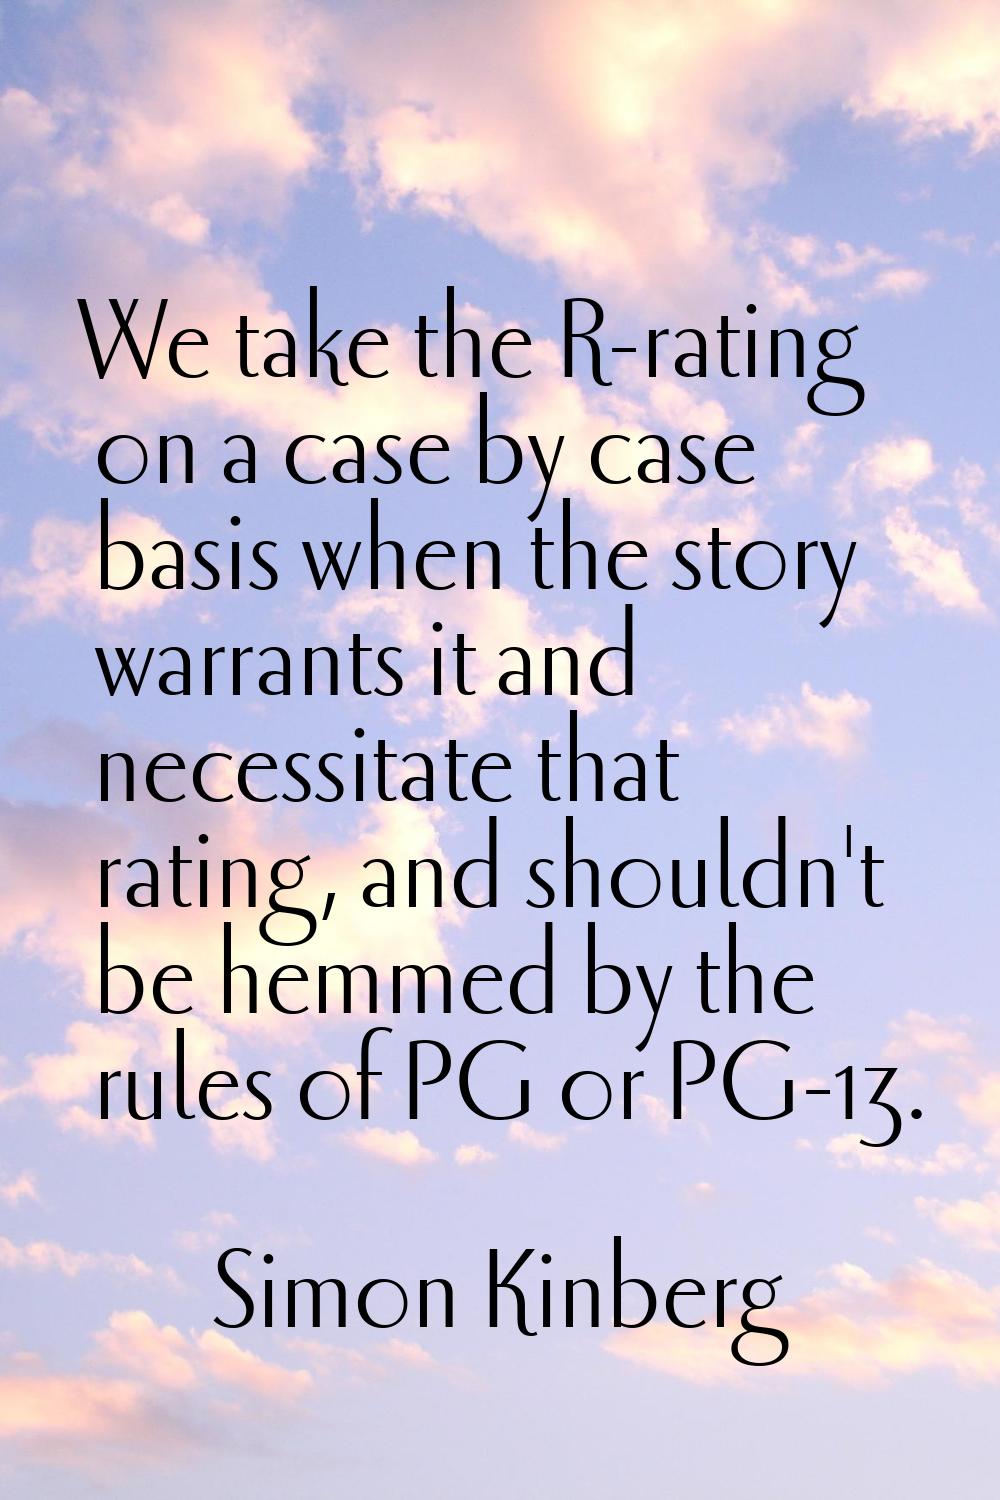 We take the R-rating on a case by case basis when the story warrants it and necessitate that rating